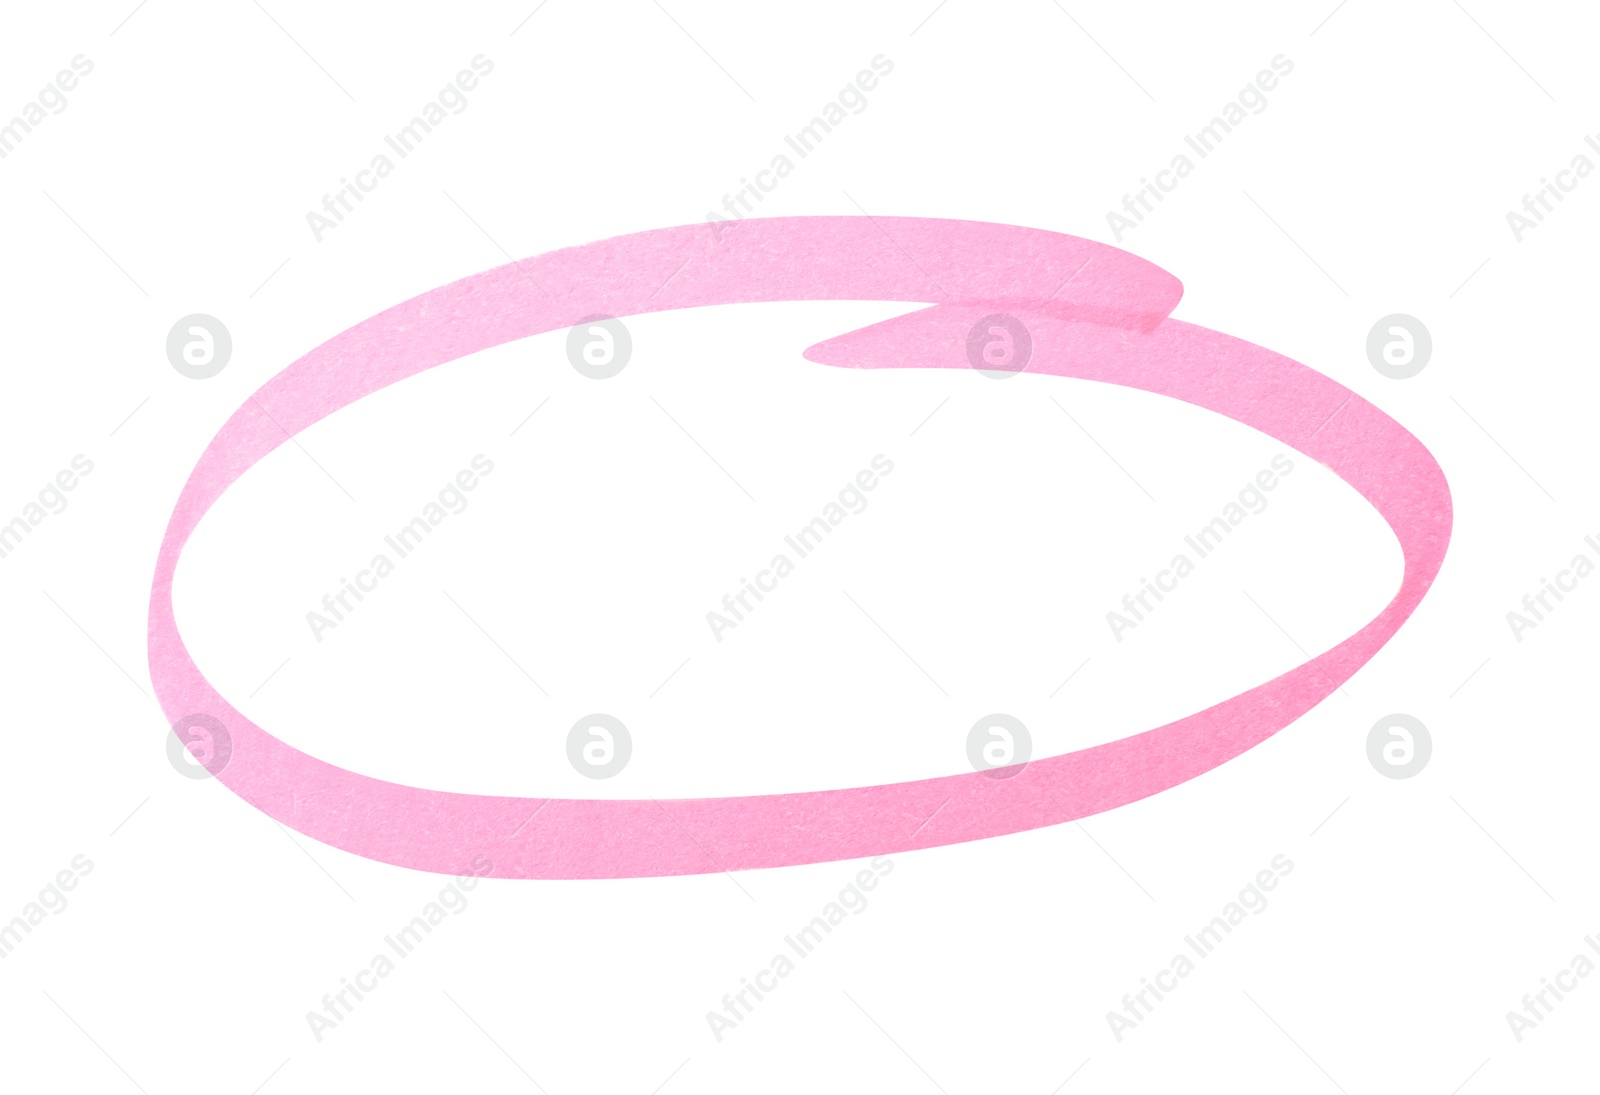 Photo of Ellipse drawn with pink marker on white background, top view